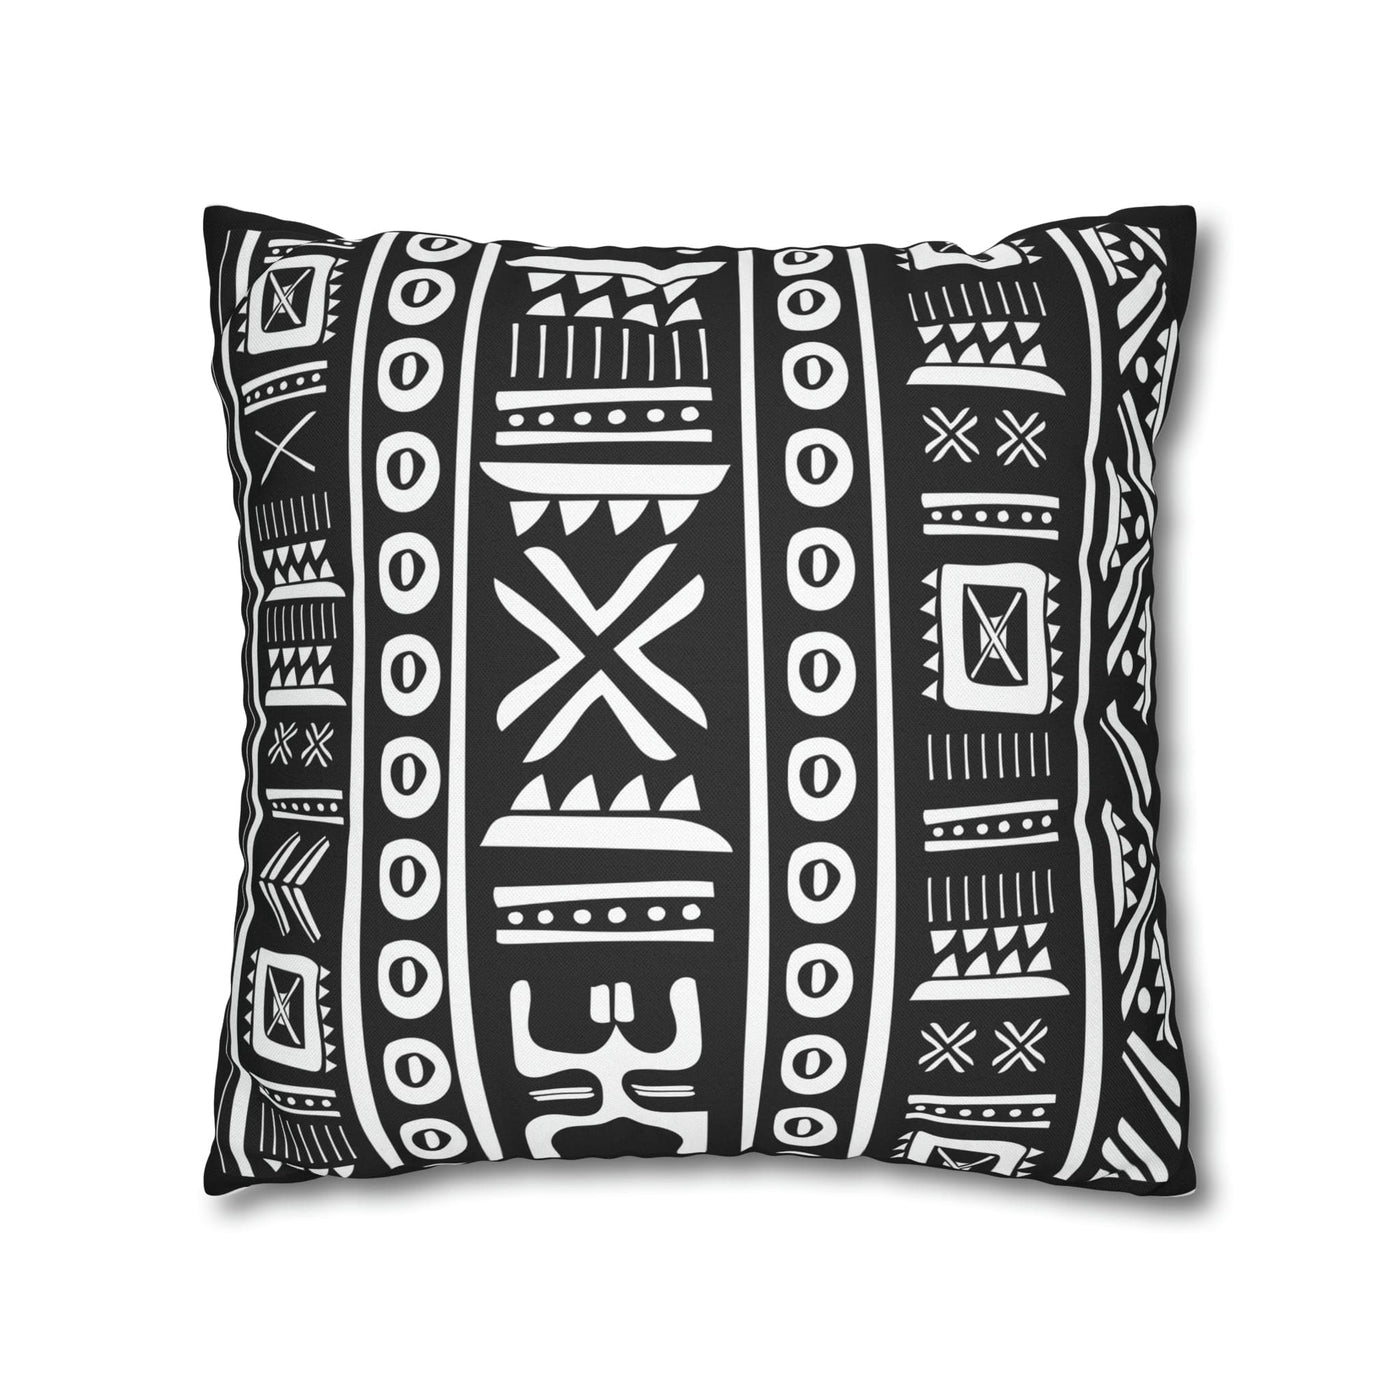 Decorative Throw Pillow Covers With Zipper - Set Of 2 Black And White Tribal